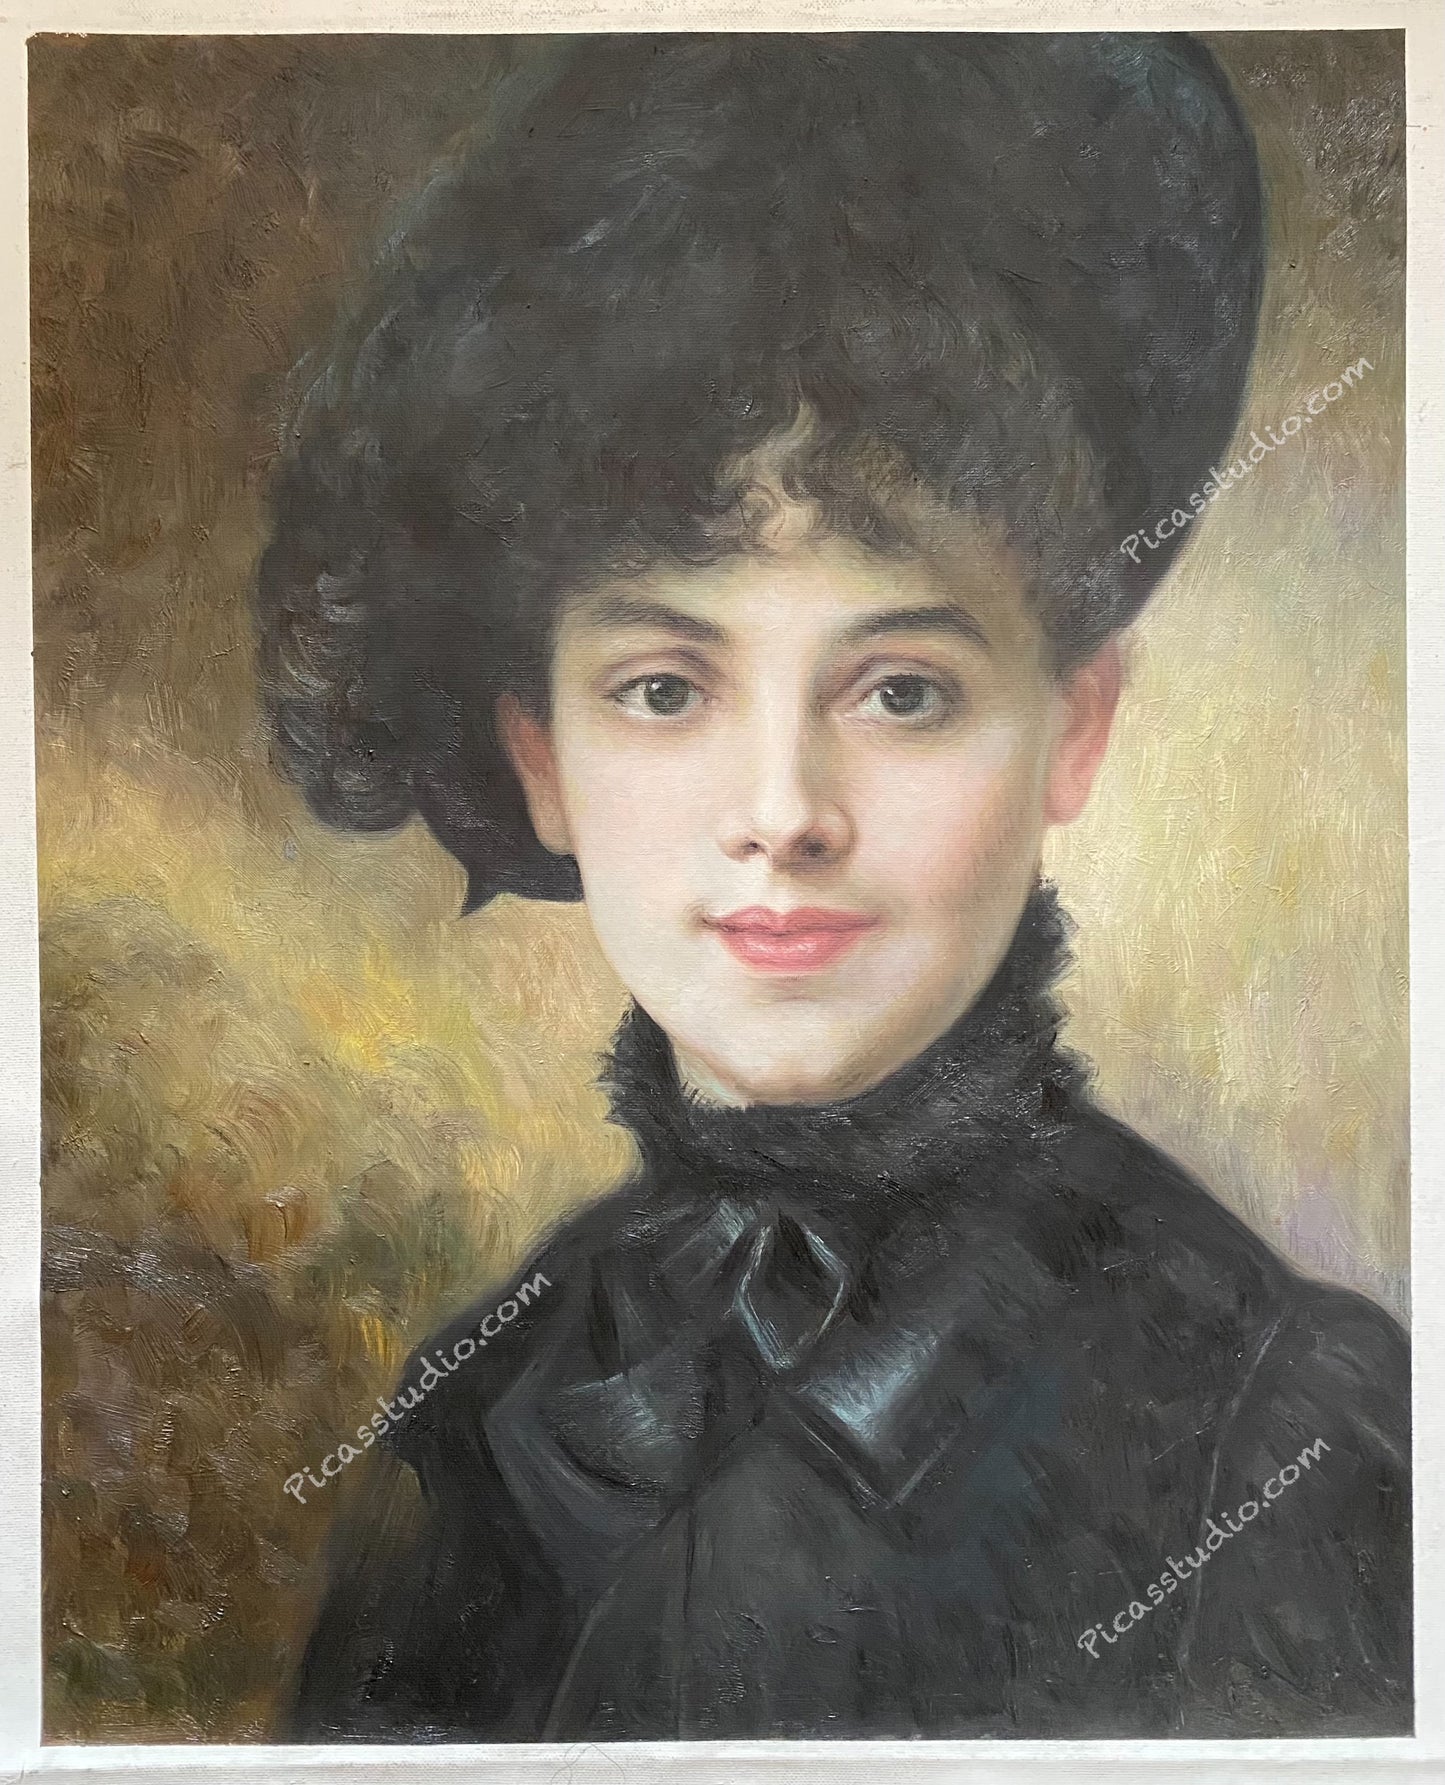 Antique Portrait Beautiful Woman Oil Painting Hand Painted on Canvas Vintage Wall Art Decor Unframed